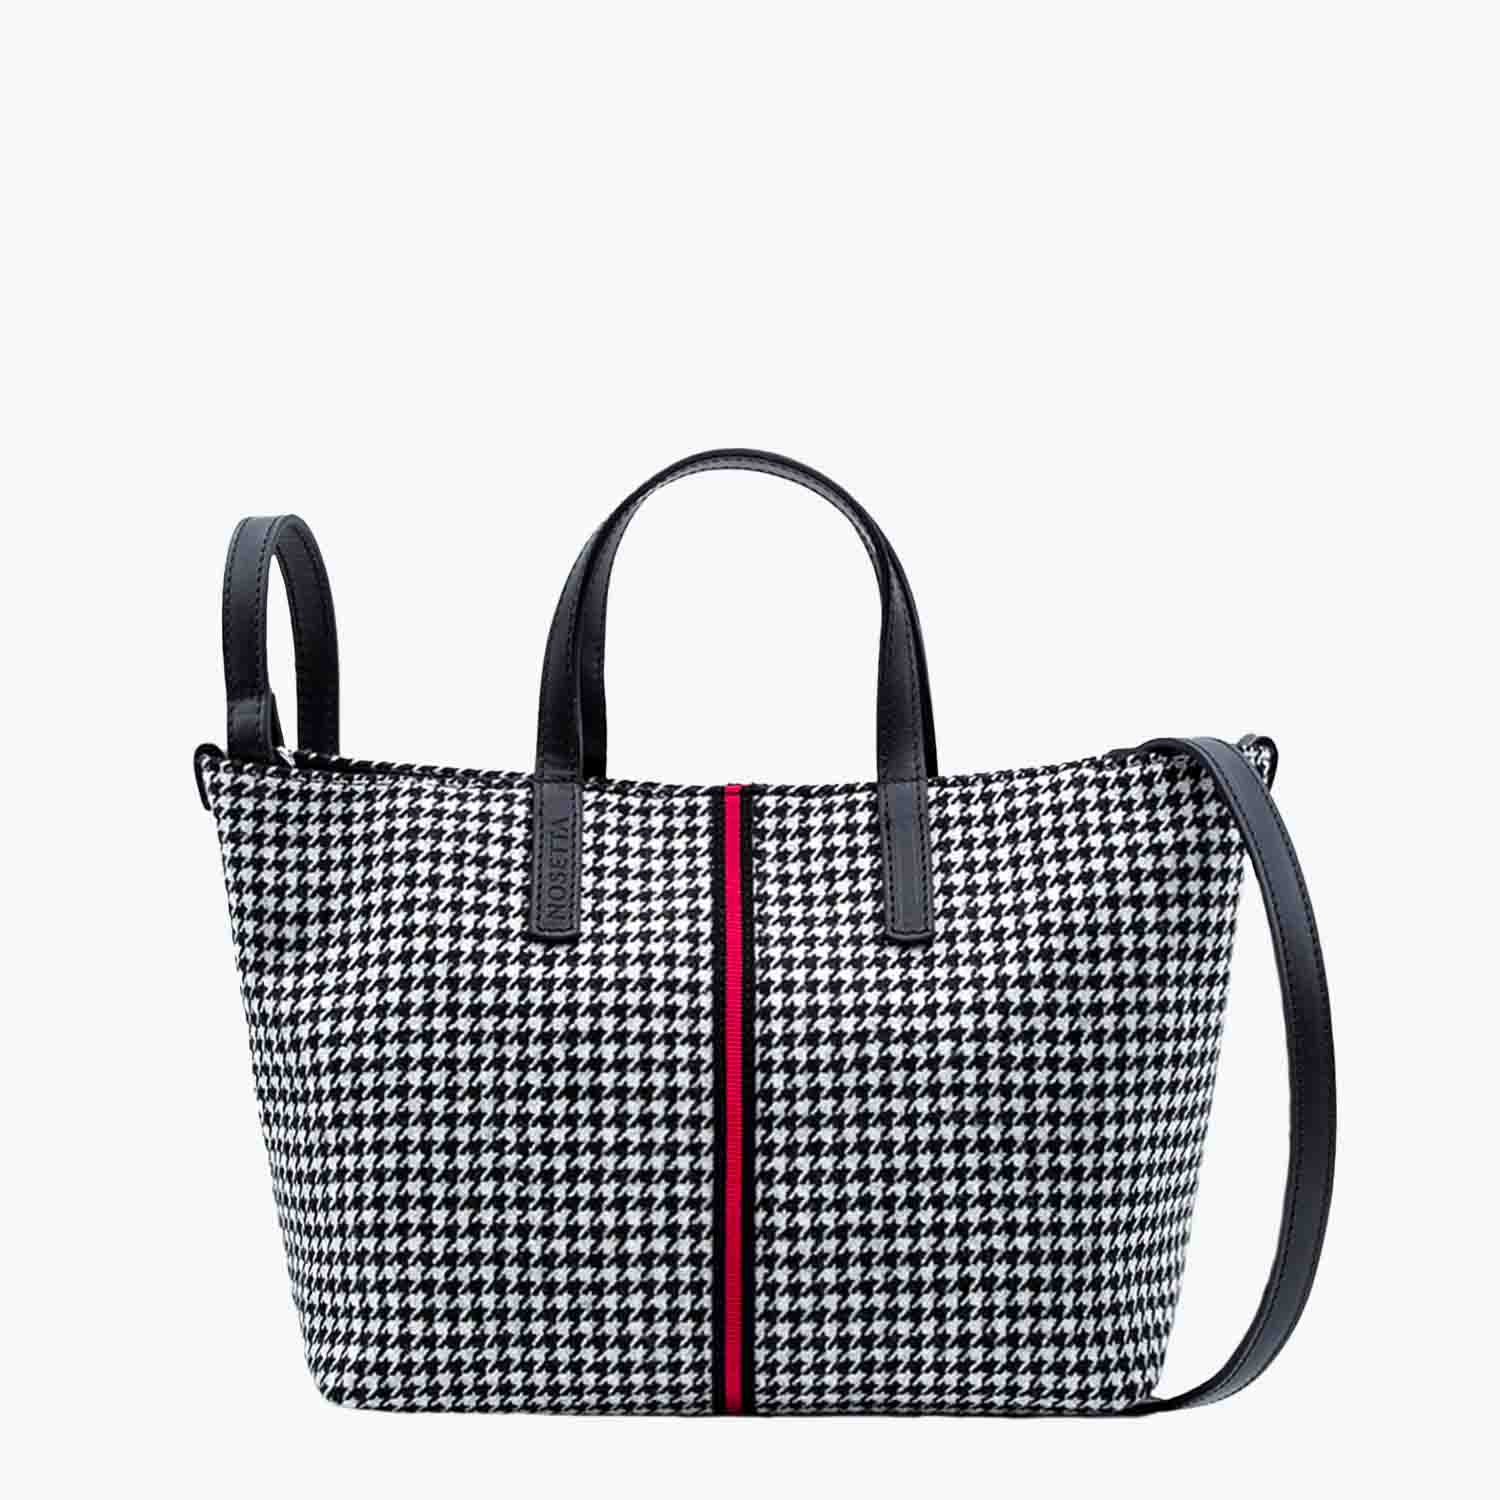 Carlia Small Tote Wool Houndstooth and Leather